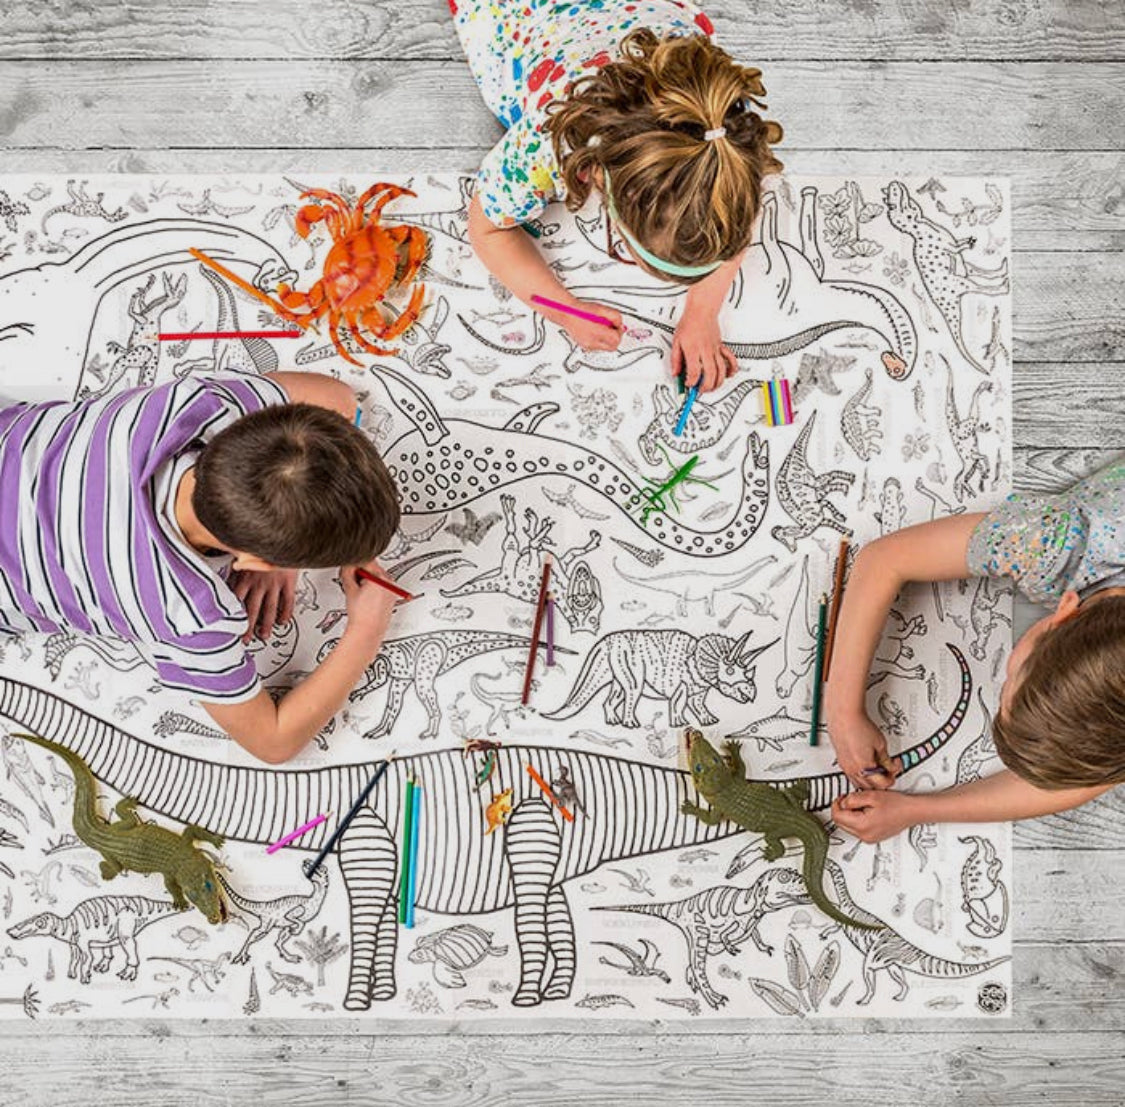 Giant colouring in poster/tablecloth - Dinosaurs